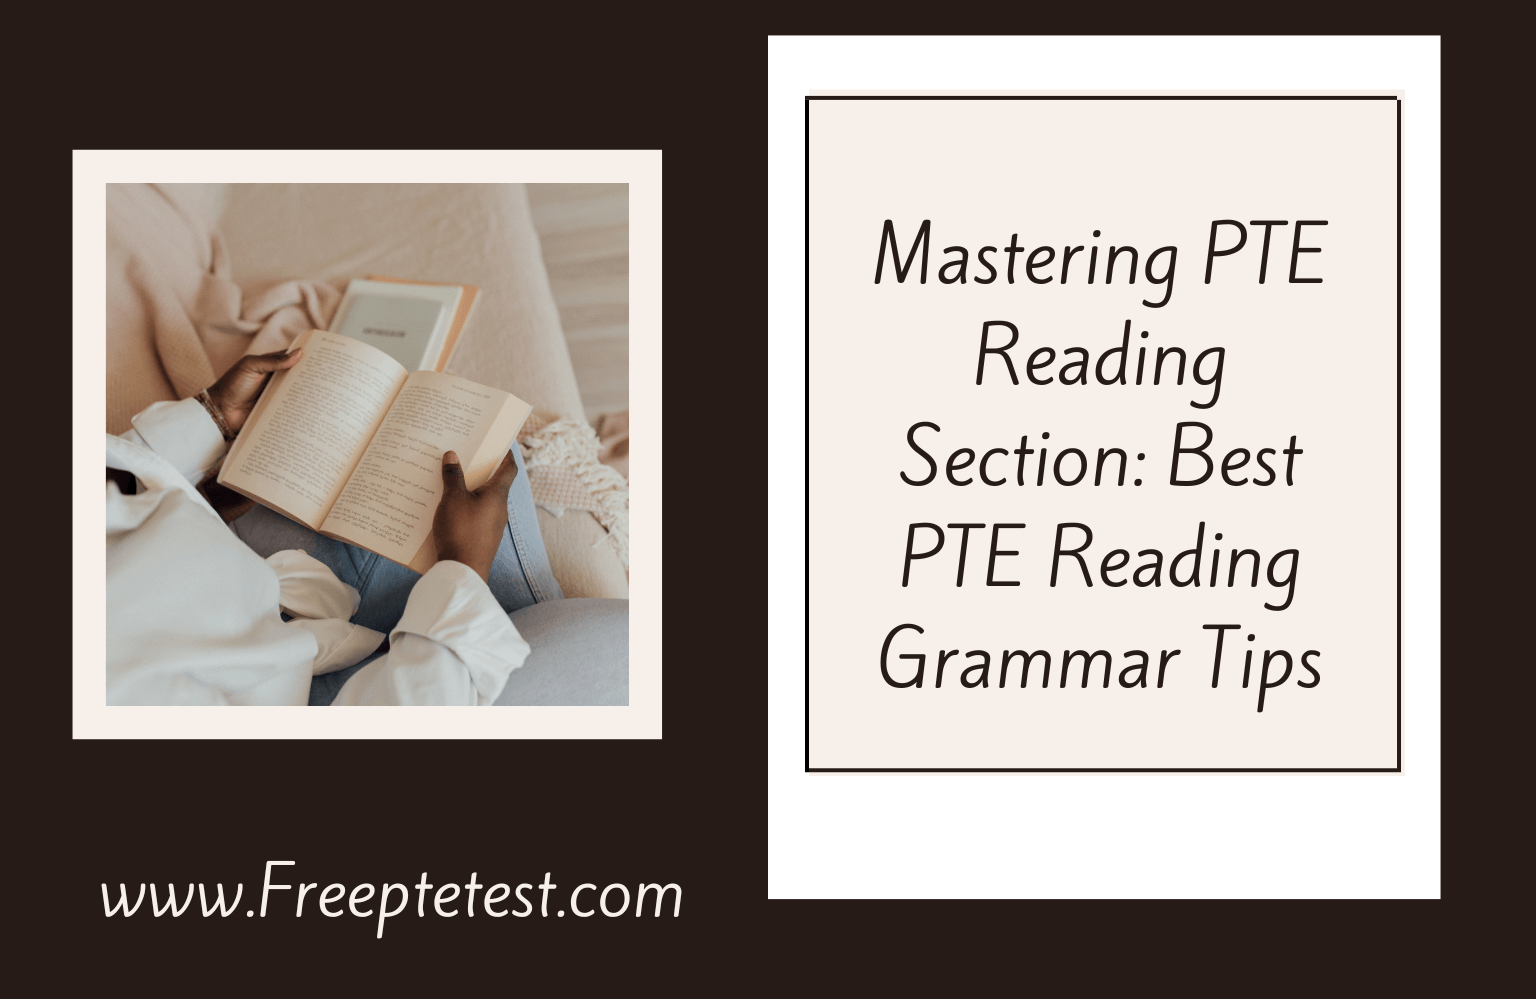 You are currently viewing Mastering PTE Reading Section: Best PTE Reading Grammar Tips